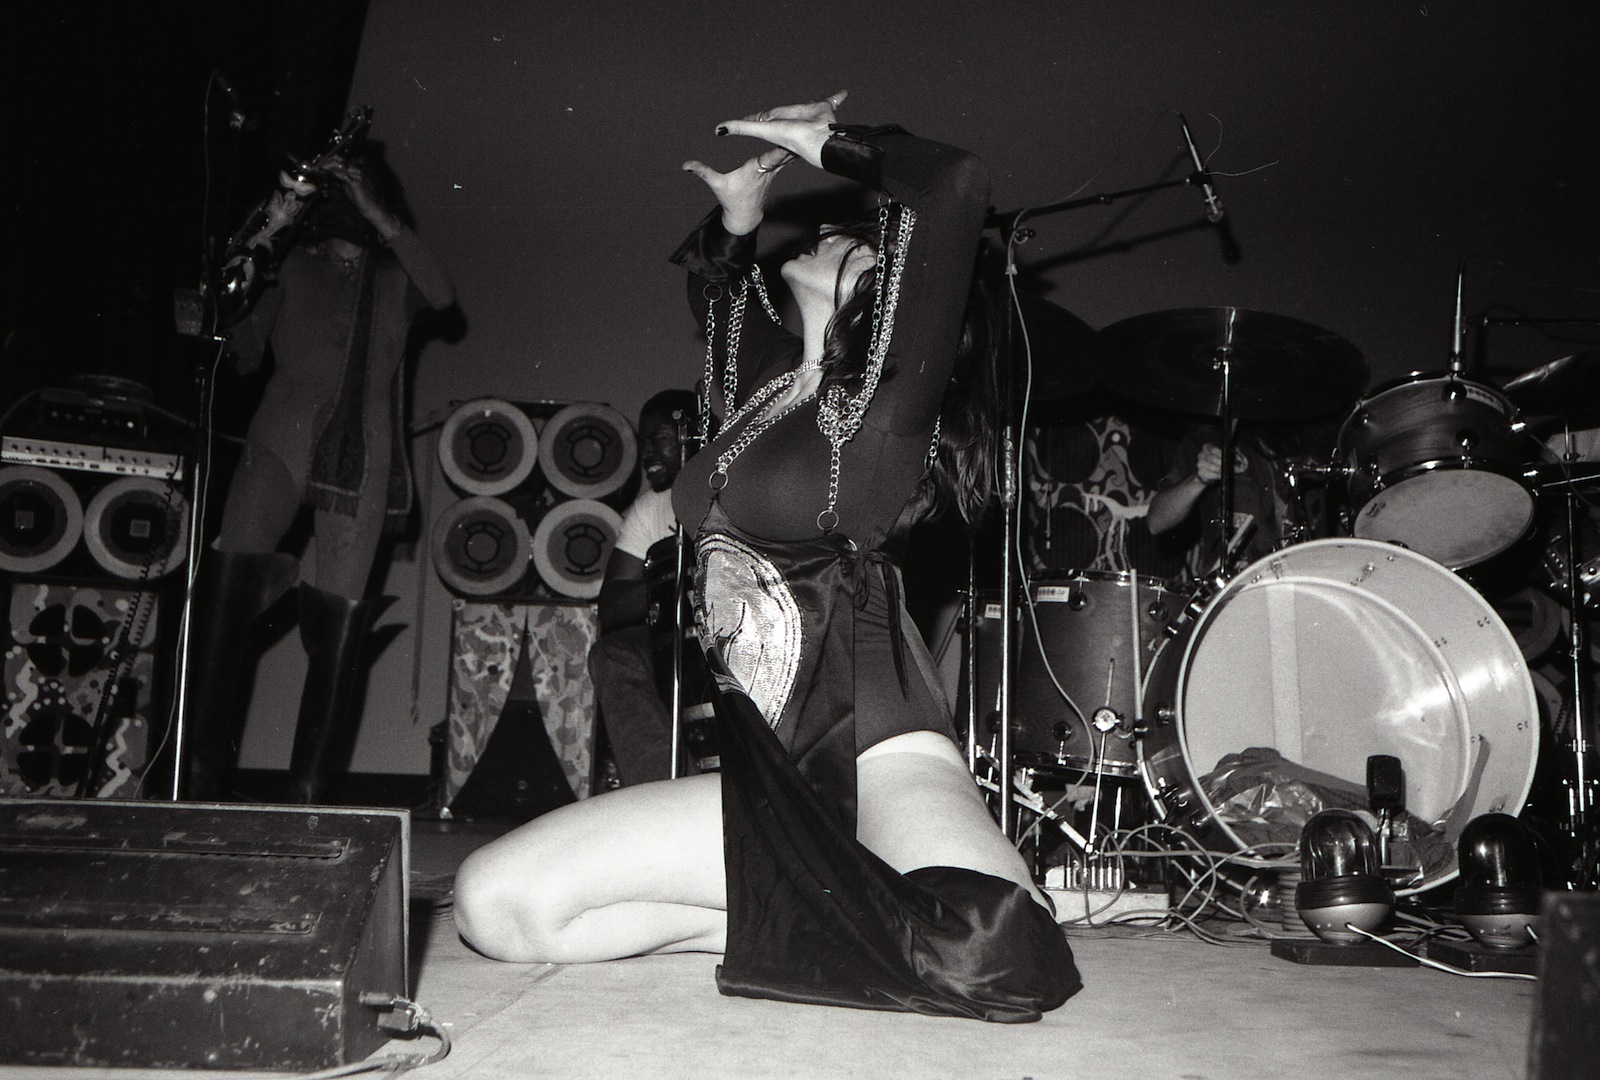 Stacia from hawkwind